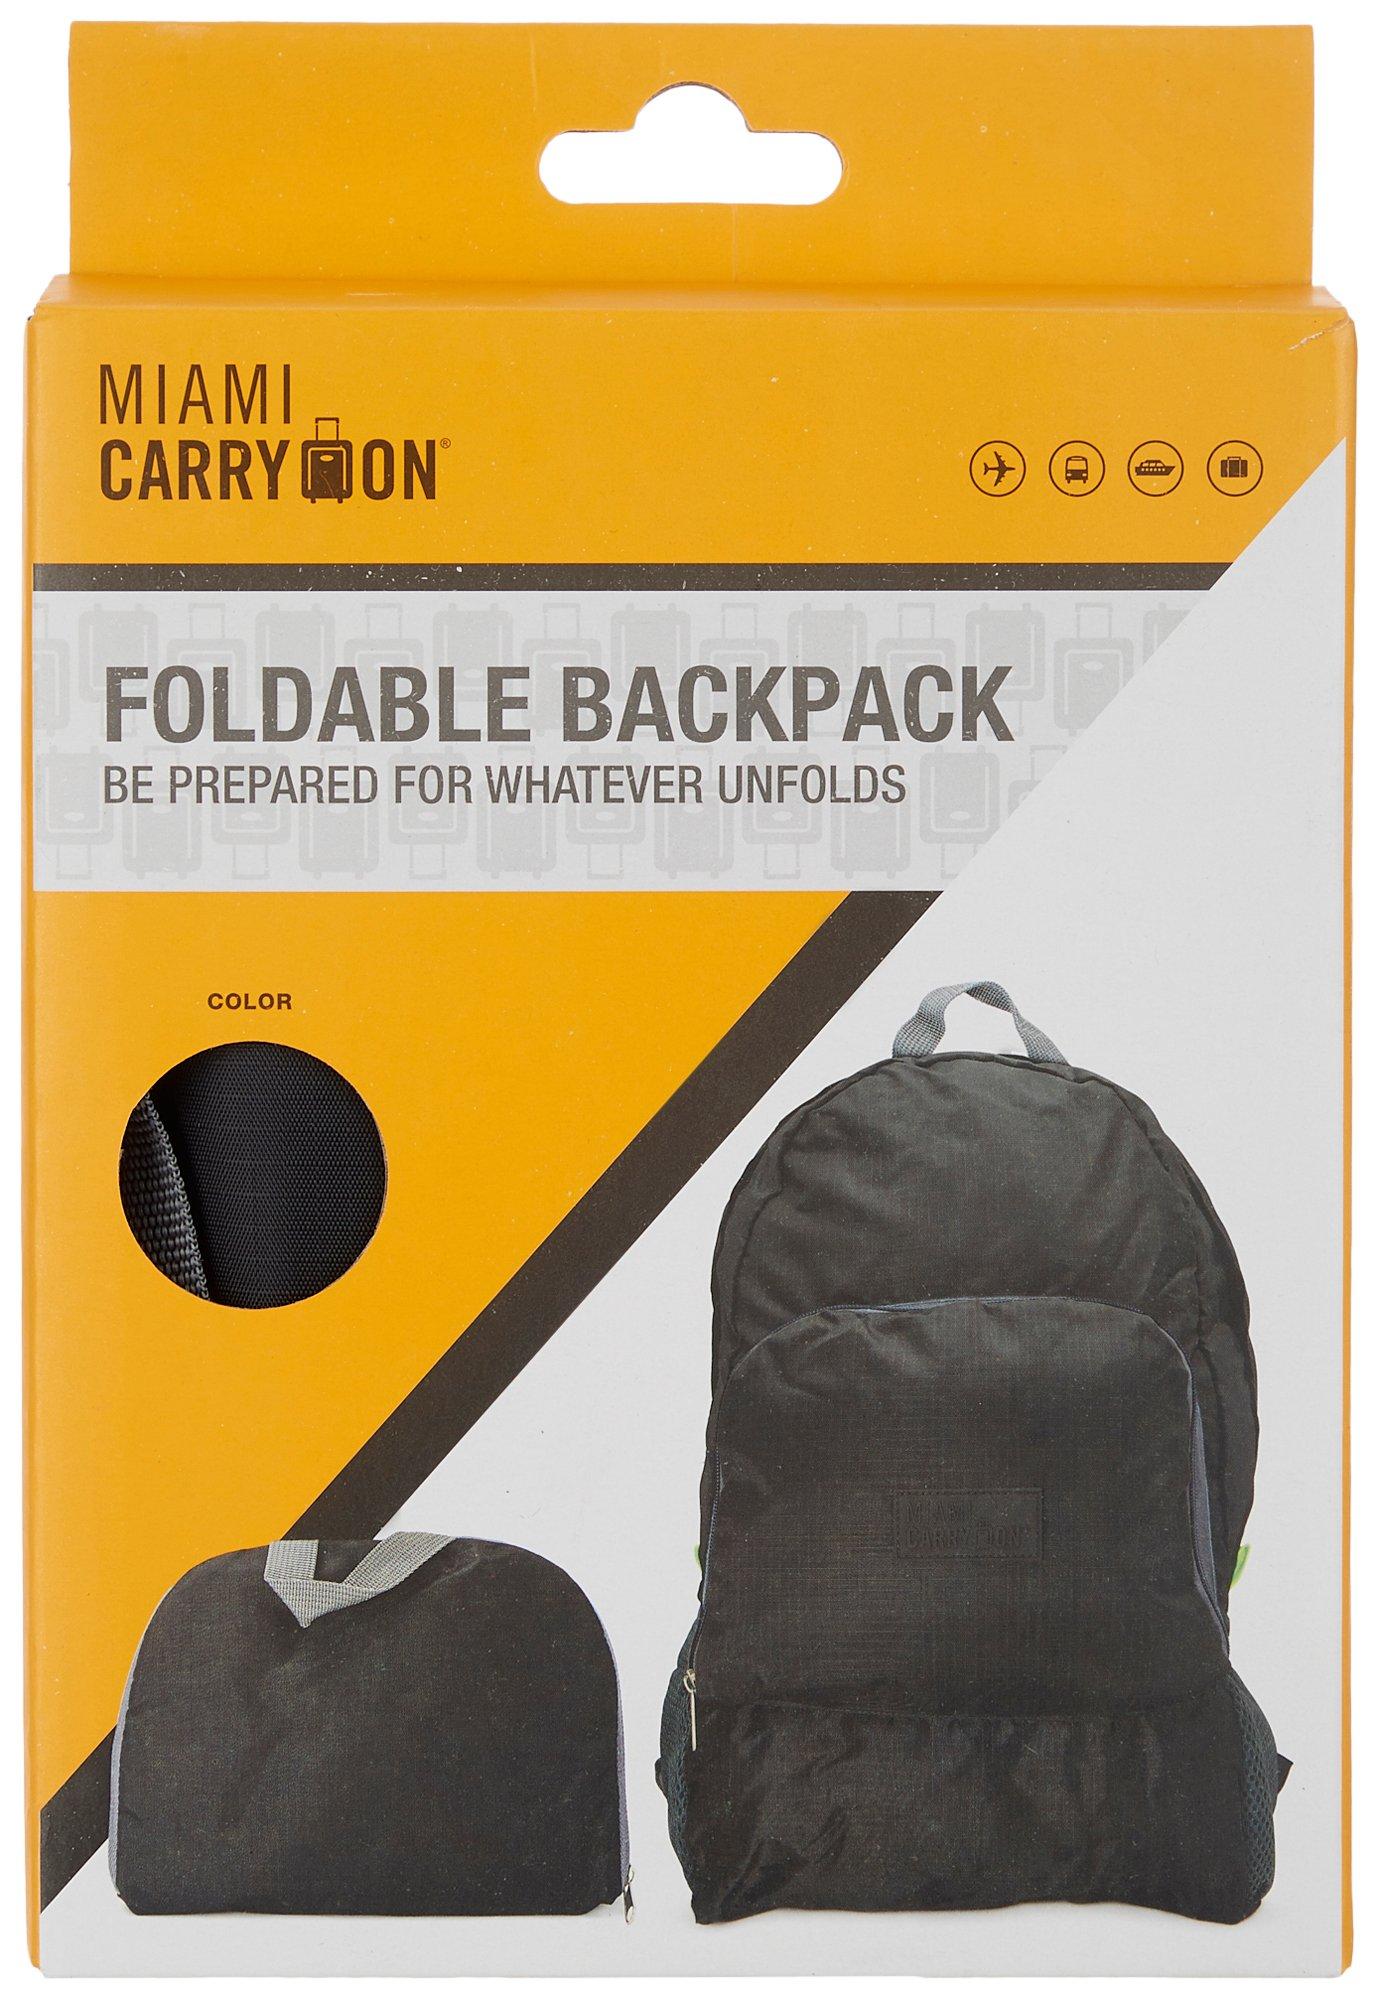 Miami Carry On Foldable Backpack